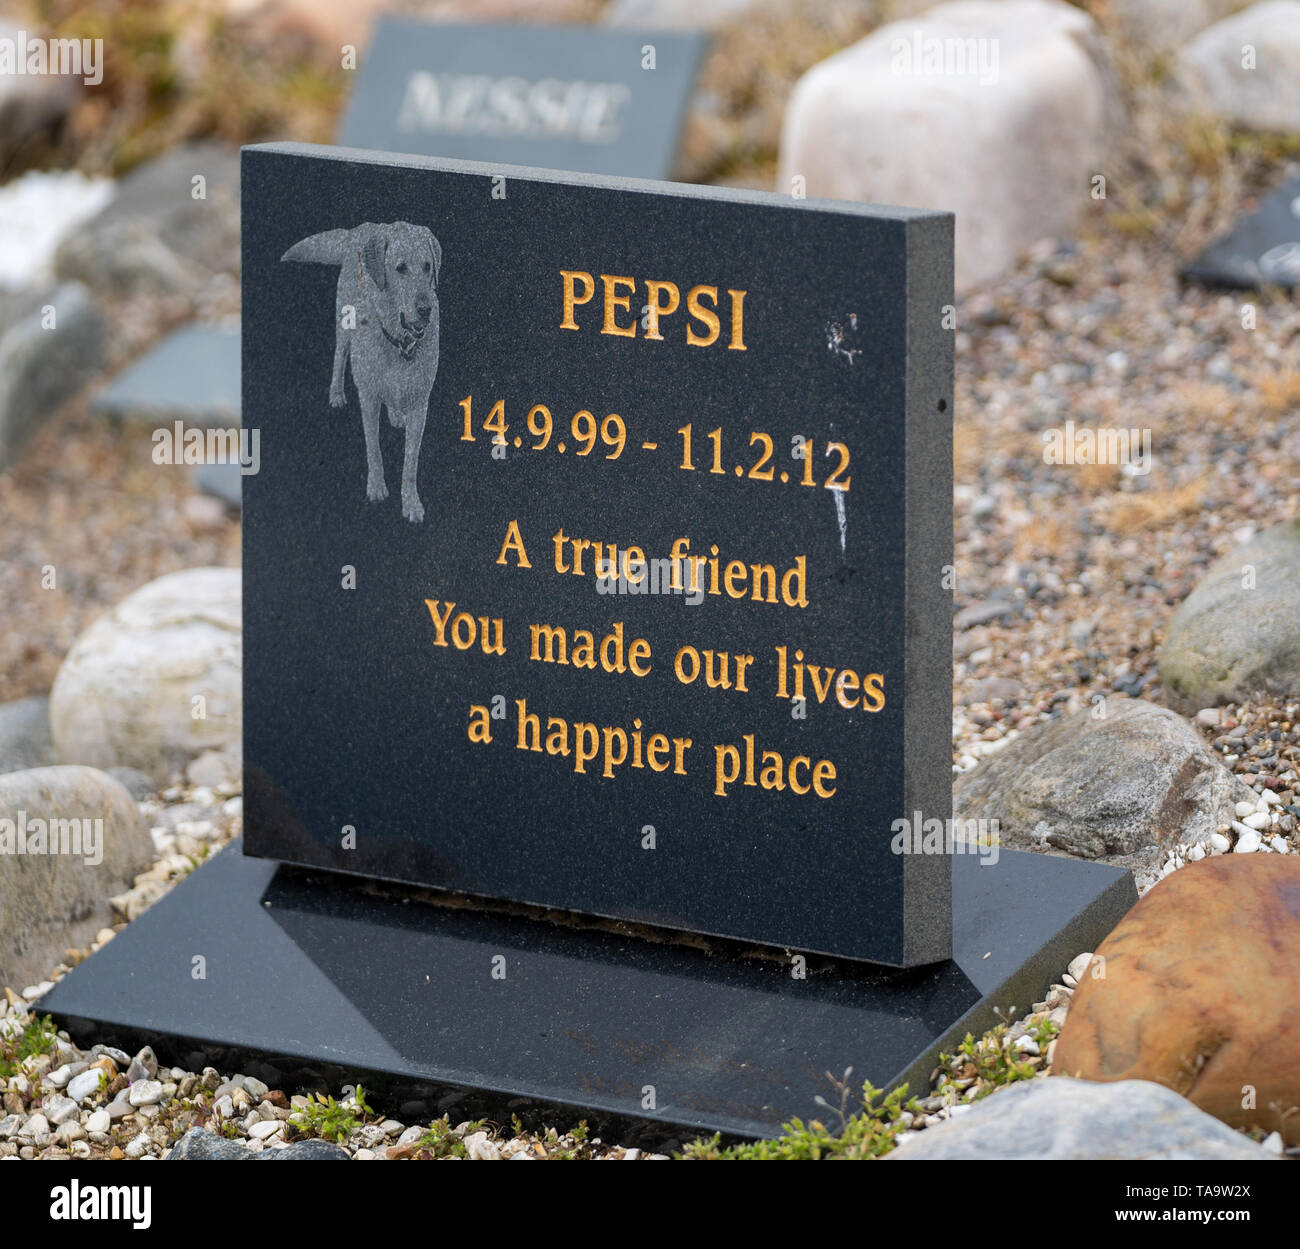 Cullen Pet Cemetery, Cullen Beach, Moray, UK. 23rd May, 2019. UK. This is the Pet Cemetery at Cullen which has been hit with UK Government quango, the Animal and Plant Health Agency (APHA), bill for running an “animal waste disposal business”. Credit: JASPERIMAGE/Alamy Live News Stock Photo